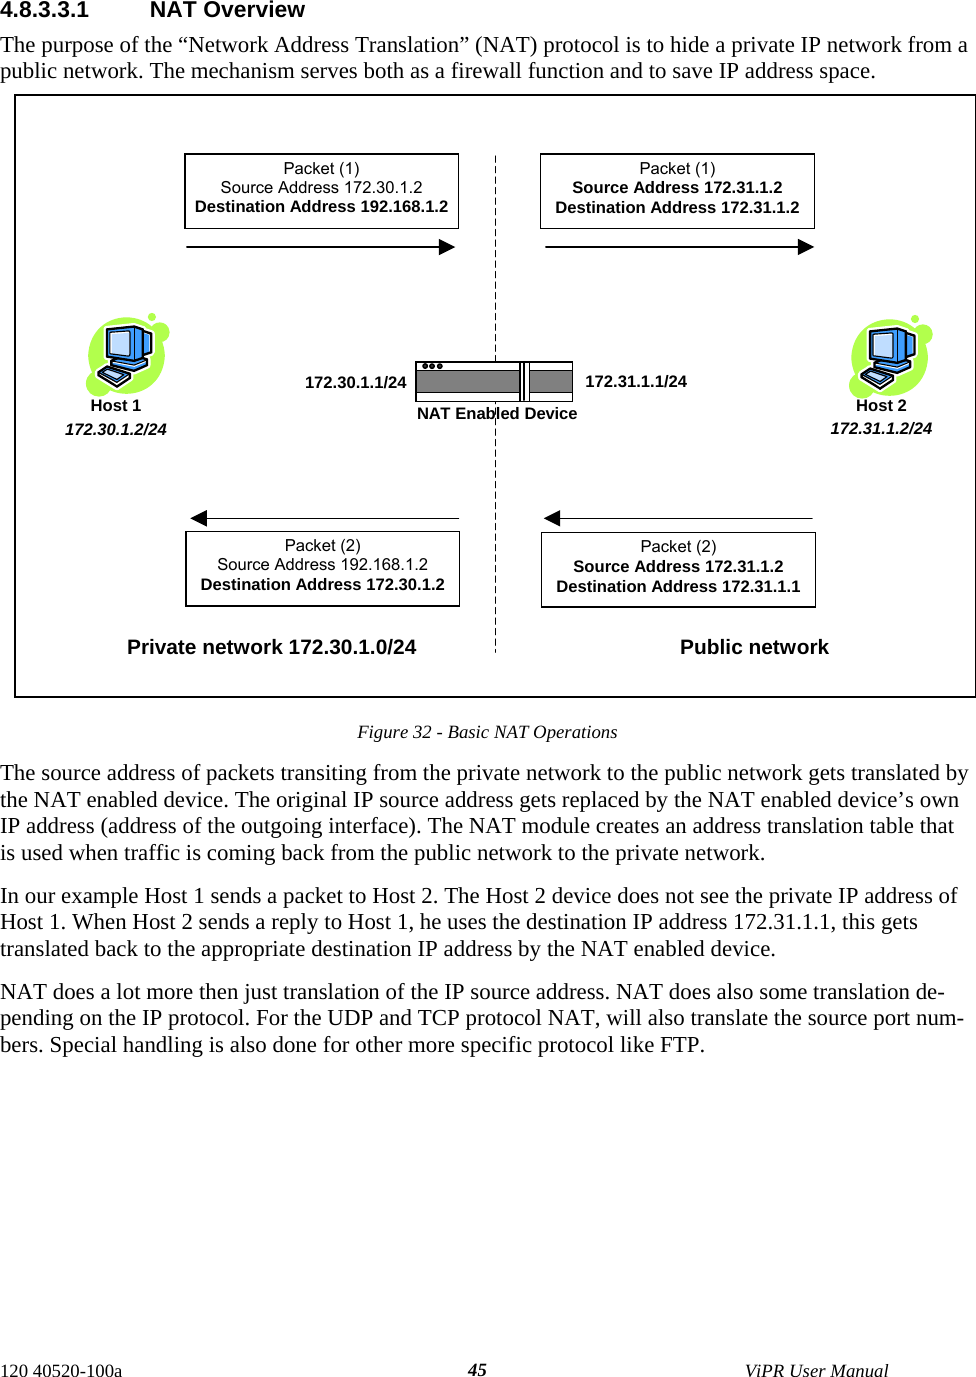  120 40520-100a    ViPR User Manual  454.8.3.3.1 NAT Overview The purpose of the “Network Address Translation” (NAT) protocol is to hide a private IP network from a public network. The mechanism serves both as a firewall function and to save IP address space.               Figure 32 - Basic NAT Operations The source address of packets transiting from the private network to the public network gets translated by the NAT enabled device. The original IP source address gets replaced by the NAT enabled device’s own IP address (address of the outgoing interface). The NAT module creates an address translation table that is used when traffic is coming back from the public network to the private network.  In our example Host 1 sends a packet to Host 2. The Host 2 device does not see the private IP address of Host 1. When Host 2 sends a reply to Host 1, he uses the destination IP address 172.31.1.1, this gets translated back to the appropriate destination IP address by the NAT enabled device. NAT does a lot more then just translation of the IP source address. NAT does also some translation de-pending on the IP protocol. For the UDP and TCP protocol NAT, will also translate the source port num-bers. Special handling is also done for other more specific protocol like FTP.  Packet (1) Source Address 172.30.1.2 Destination Address 192.168.1.2 Packet (1) Source Address 172.31.1.2 Destination Address 172.31.1.2 172.30.1.1/24 172.31.1.1/24 NAT Enabled DevicePacket (2) Source Address 192.168.1.2 Destination Address 172.30.1.2 Packet (2) Source Address 172.31.1.2 Destination Address 172.31.1.1 Host 1 172.30.1.2/24 Host 2 172.31.1.2/24Private network 172.30.1.0/24  Public network  